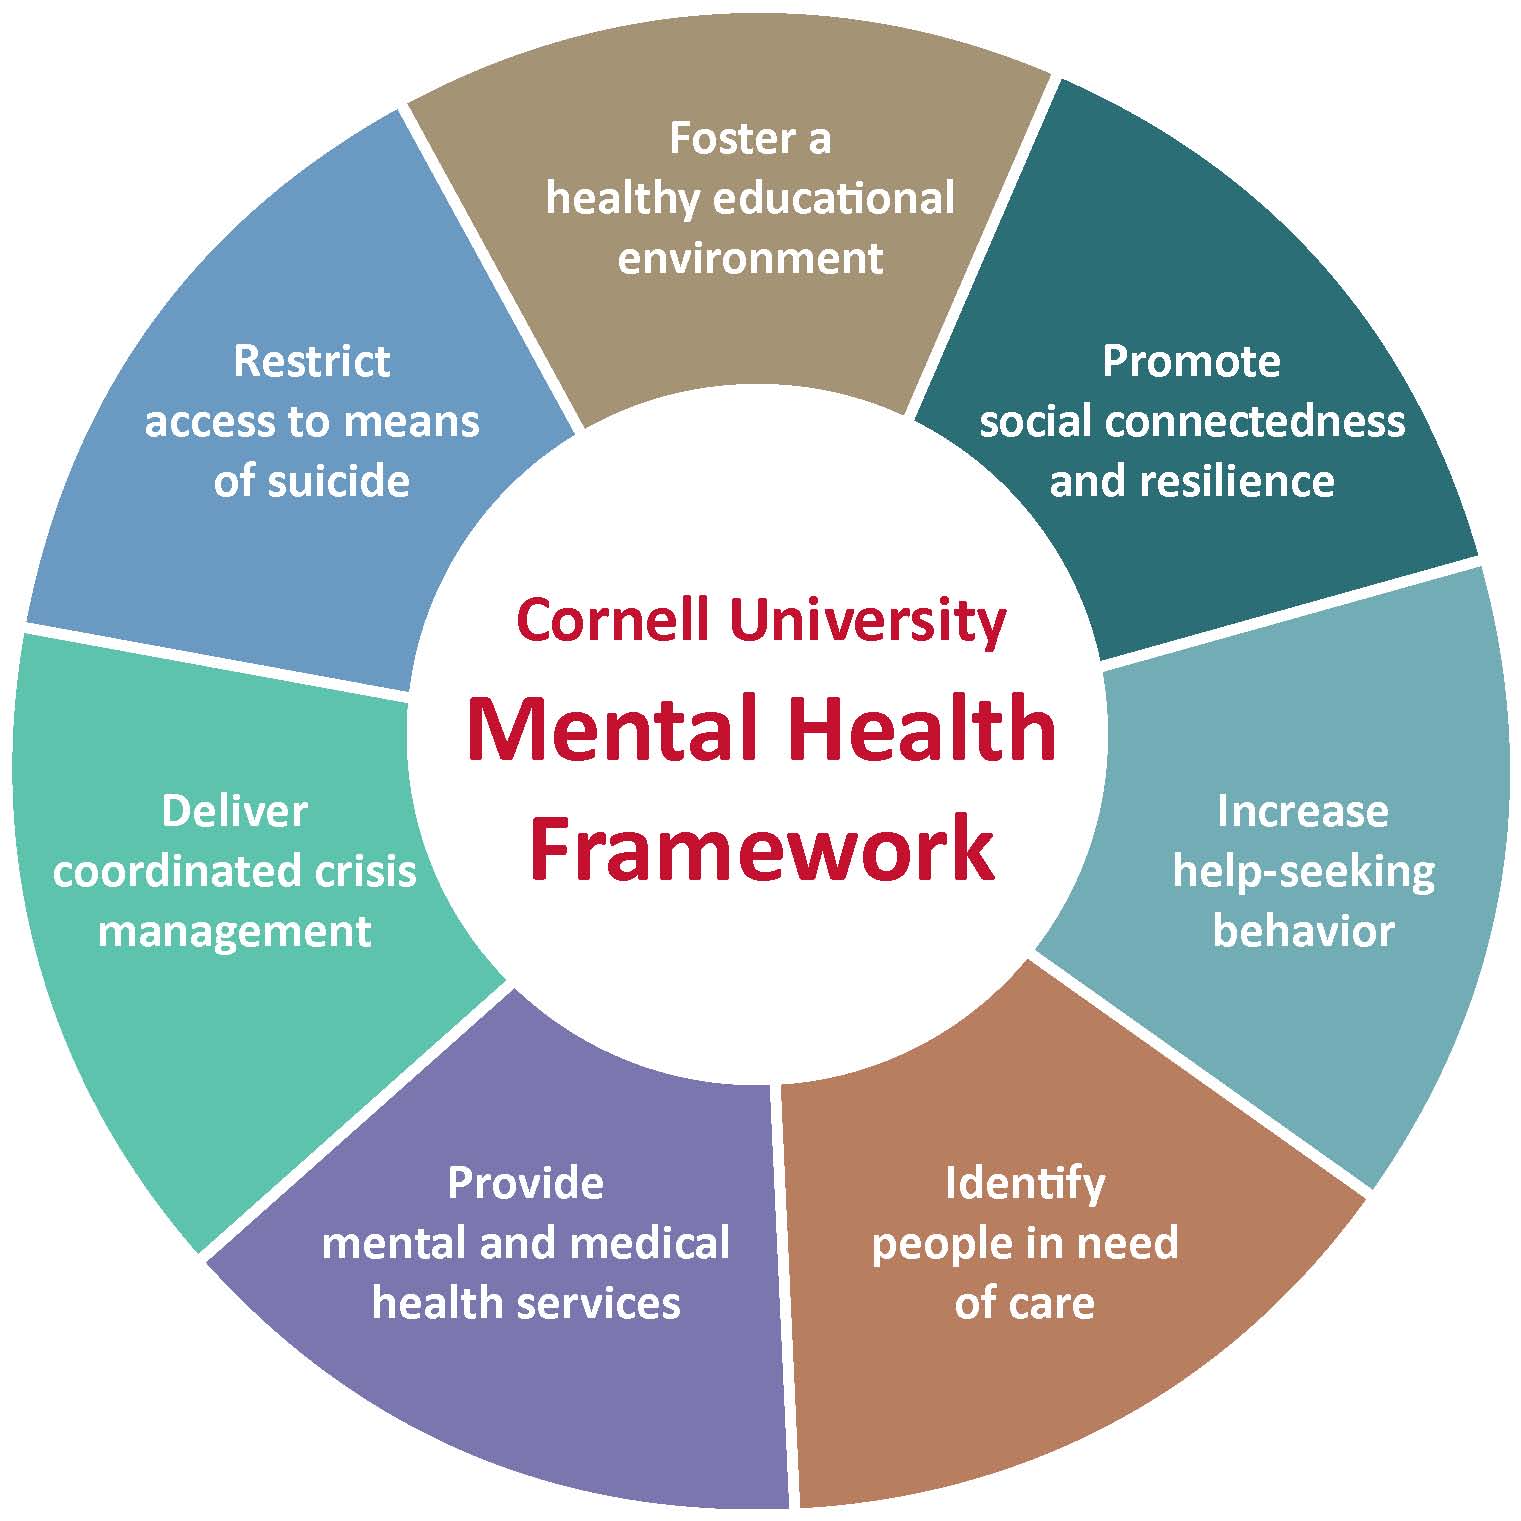 The Mental Health Framework is a circle divided into 7 equal pieces, each of which represents a key strategy in support campus mental health and well-being. The seven pieces, moving clockwise around the wheel, are as follows: 1) Foster a healthy educational environment 2) Promote social connectedness and resilience 3) Increase help-seeking behavior 4) Identify people in need 5) Provide medical and mental health services 6) Deliver coordinated crisis management 7) Restrict access to means of suicide. Each of these seven strategies is explored in greater depth at: http://ode.mentalhealth.cornell.edu/mental-health-framework.